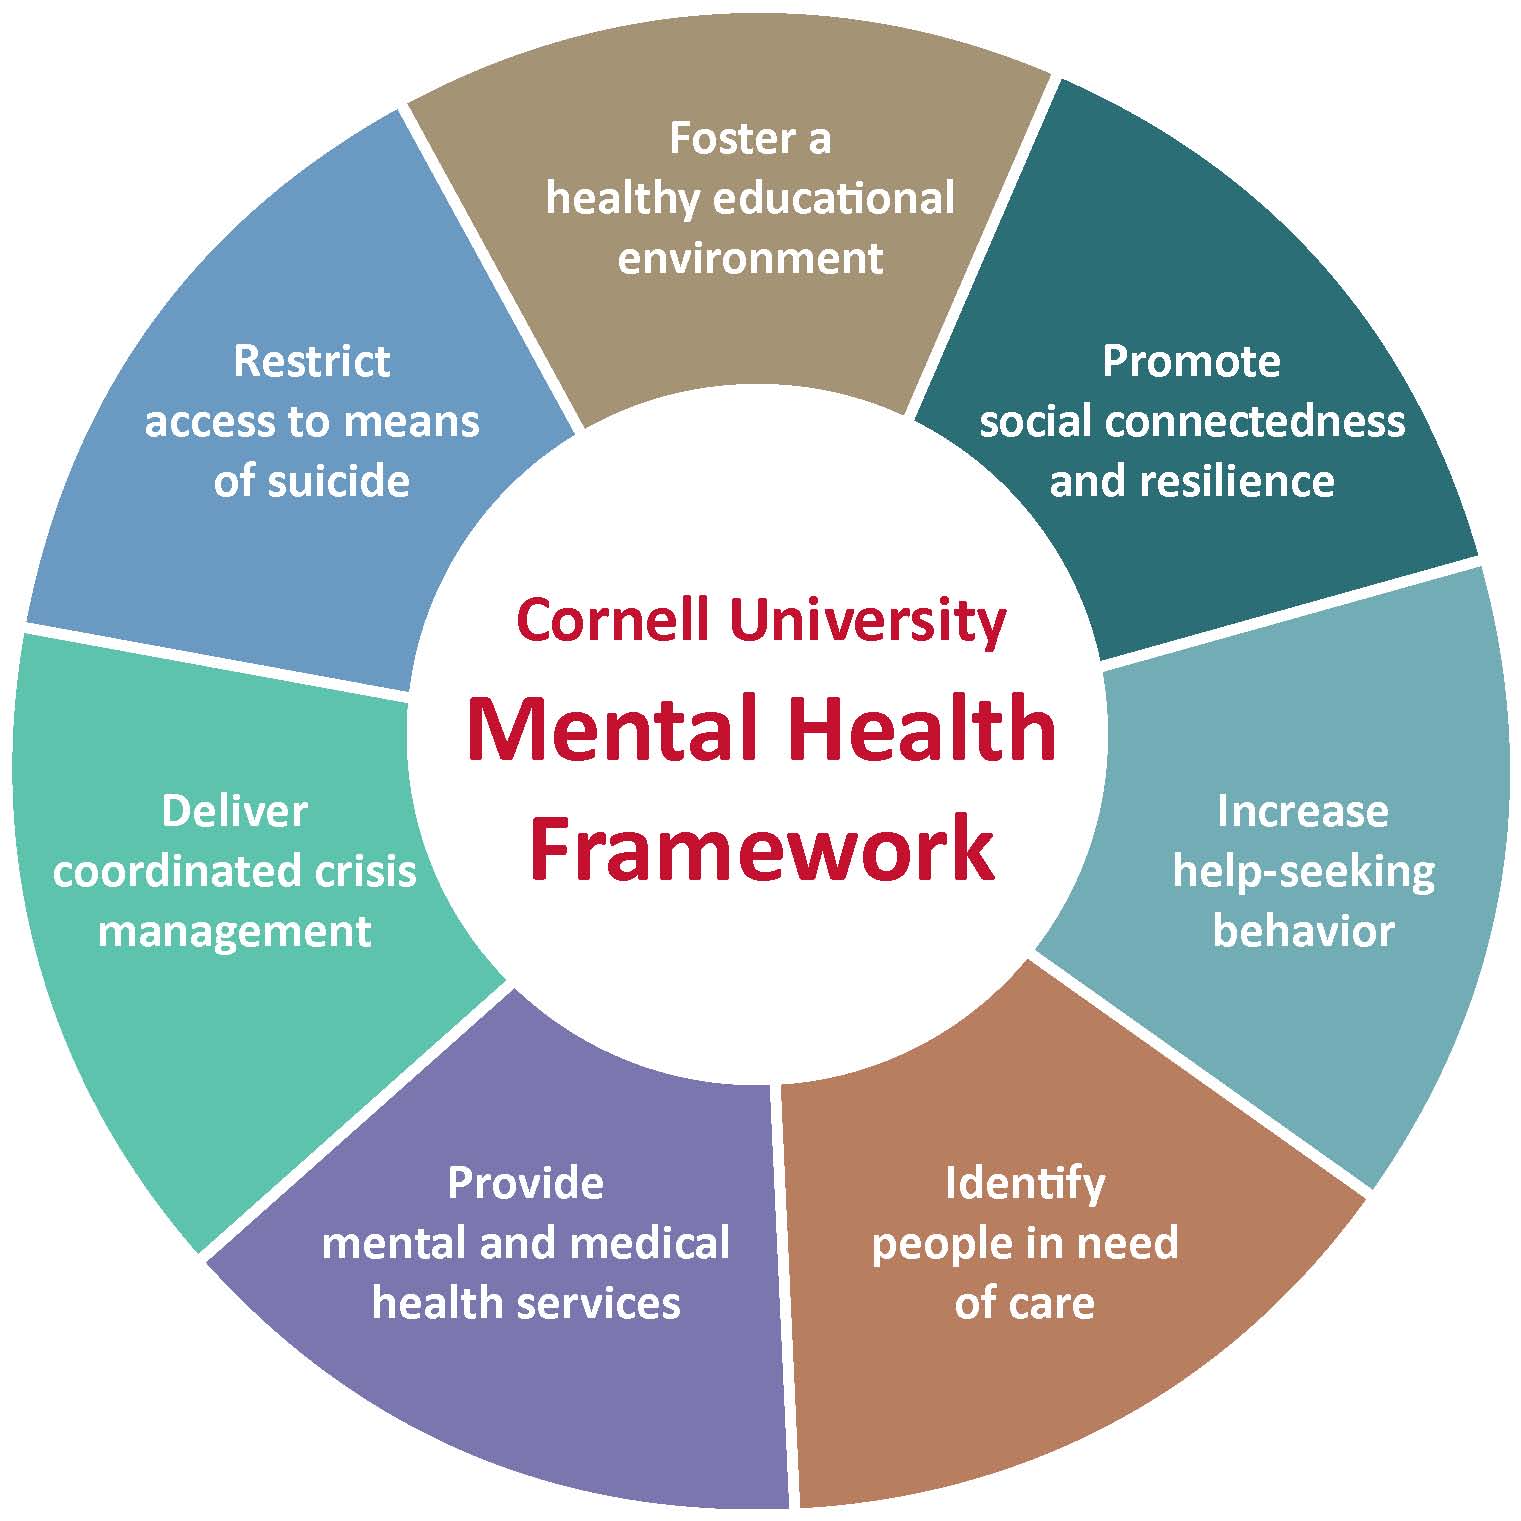 The Mental Health Framework is a circle divided into 7 equal pieces, each of which represents a key strategy in support campus mental health and well-being. The seven pieces, moving clockwise around the wheel, are as follows: 1) Foster a healthy educational environment 2) Promote social connectedness and resilience 3) Increase help-seeking behavior 4) Identify people in need 5) Provide medical and mental health services 6) Deliver coordinated crisis management 7) Restrict access to means of suicide. Each of these seven strategies is explored in greater depth at: http://ode.mentalhealth.cornell.edu/mental-health-framework.